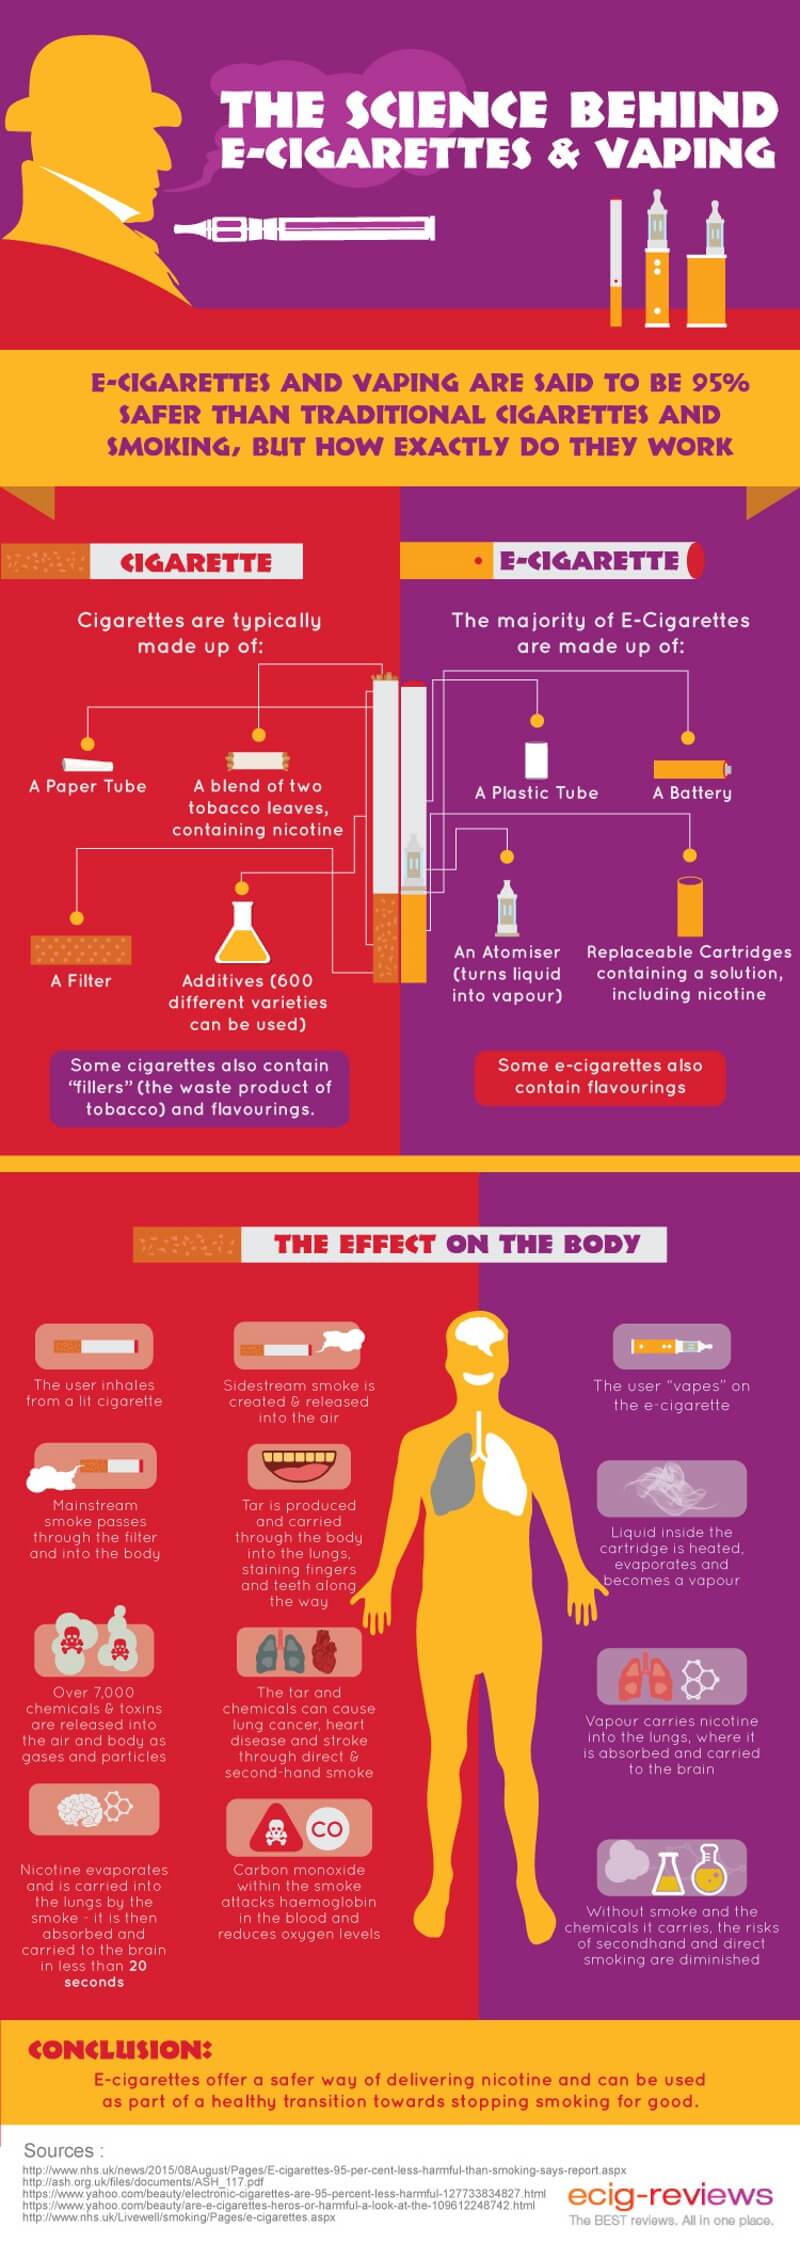 Info-graphic showing the science behind vaping